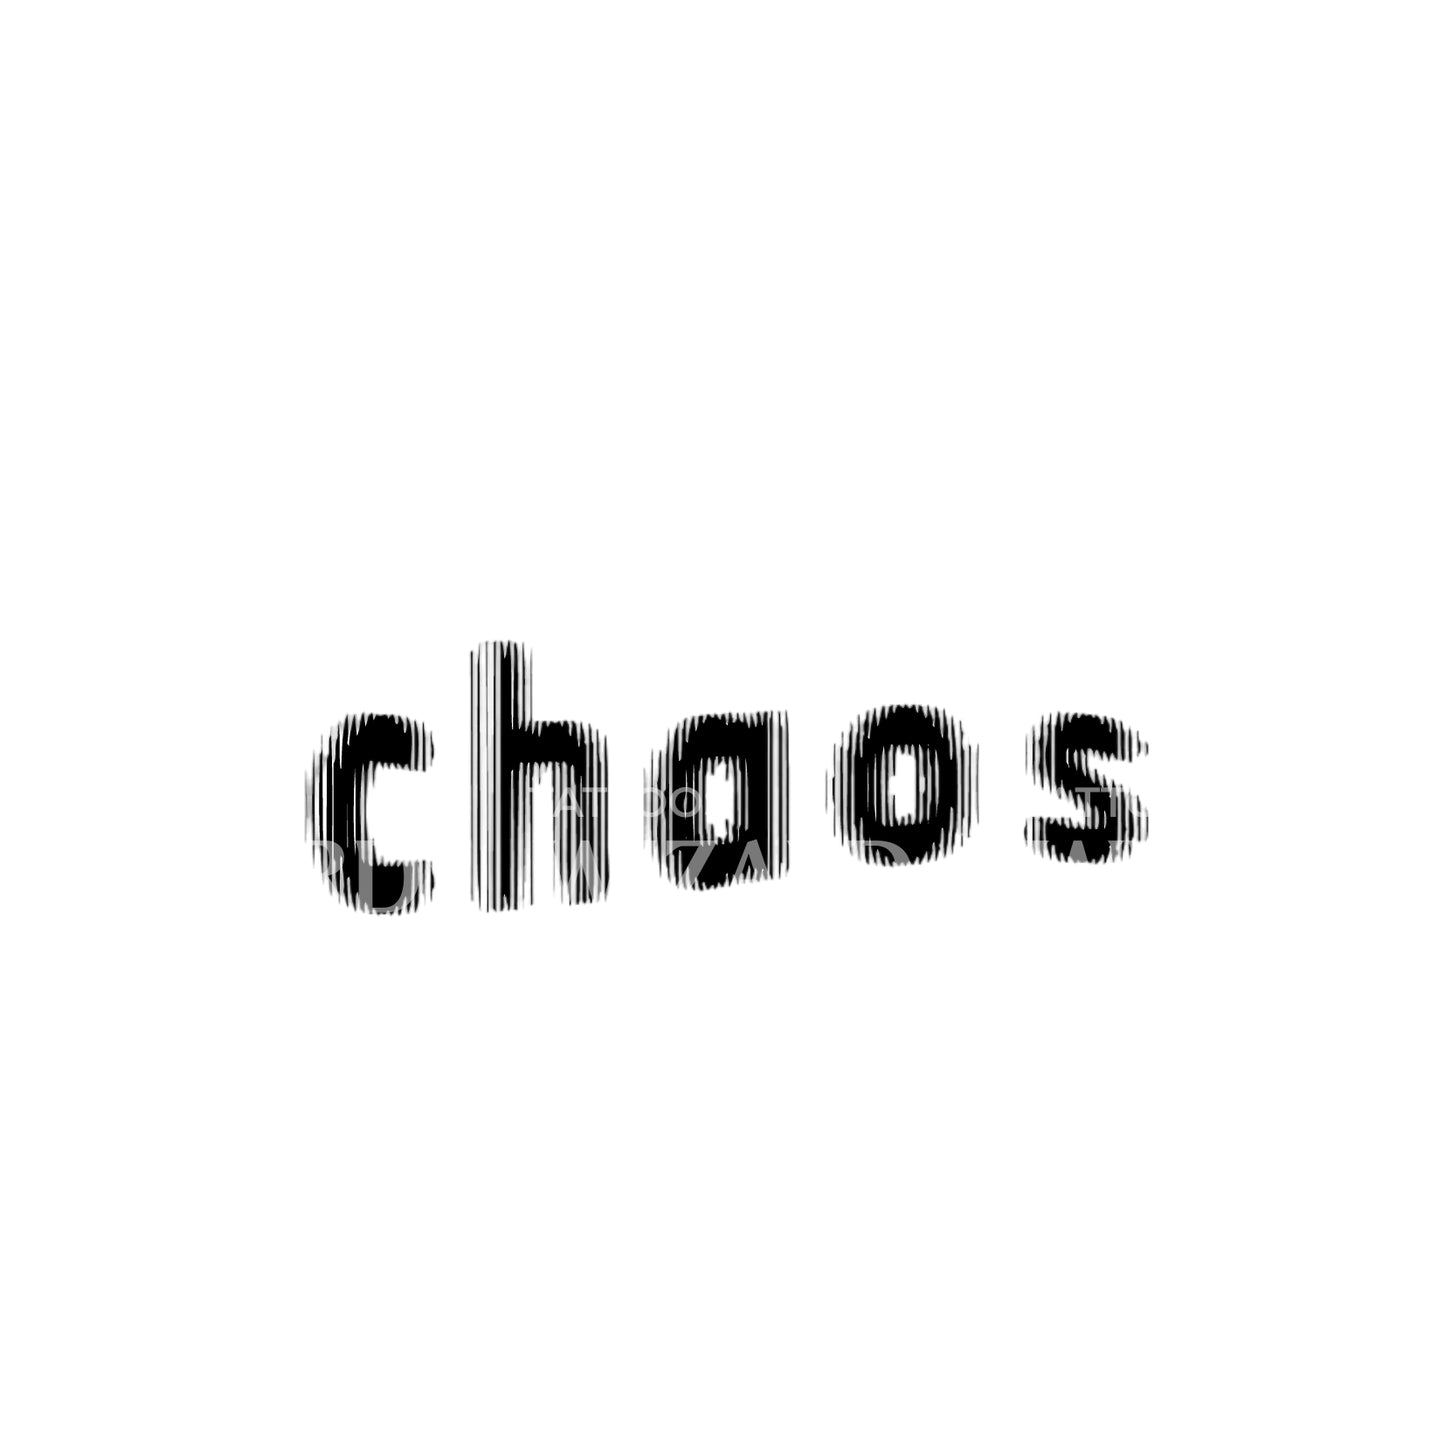 Chaos Blurry Font Lettering Tattoo Design